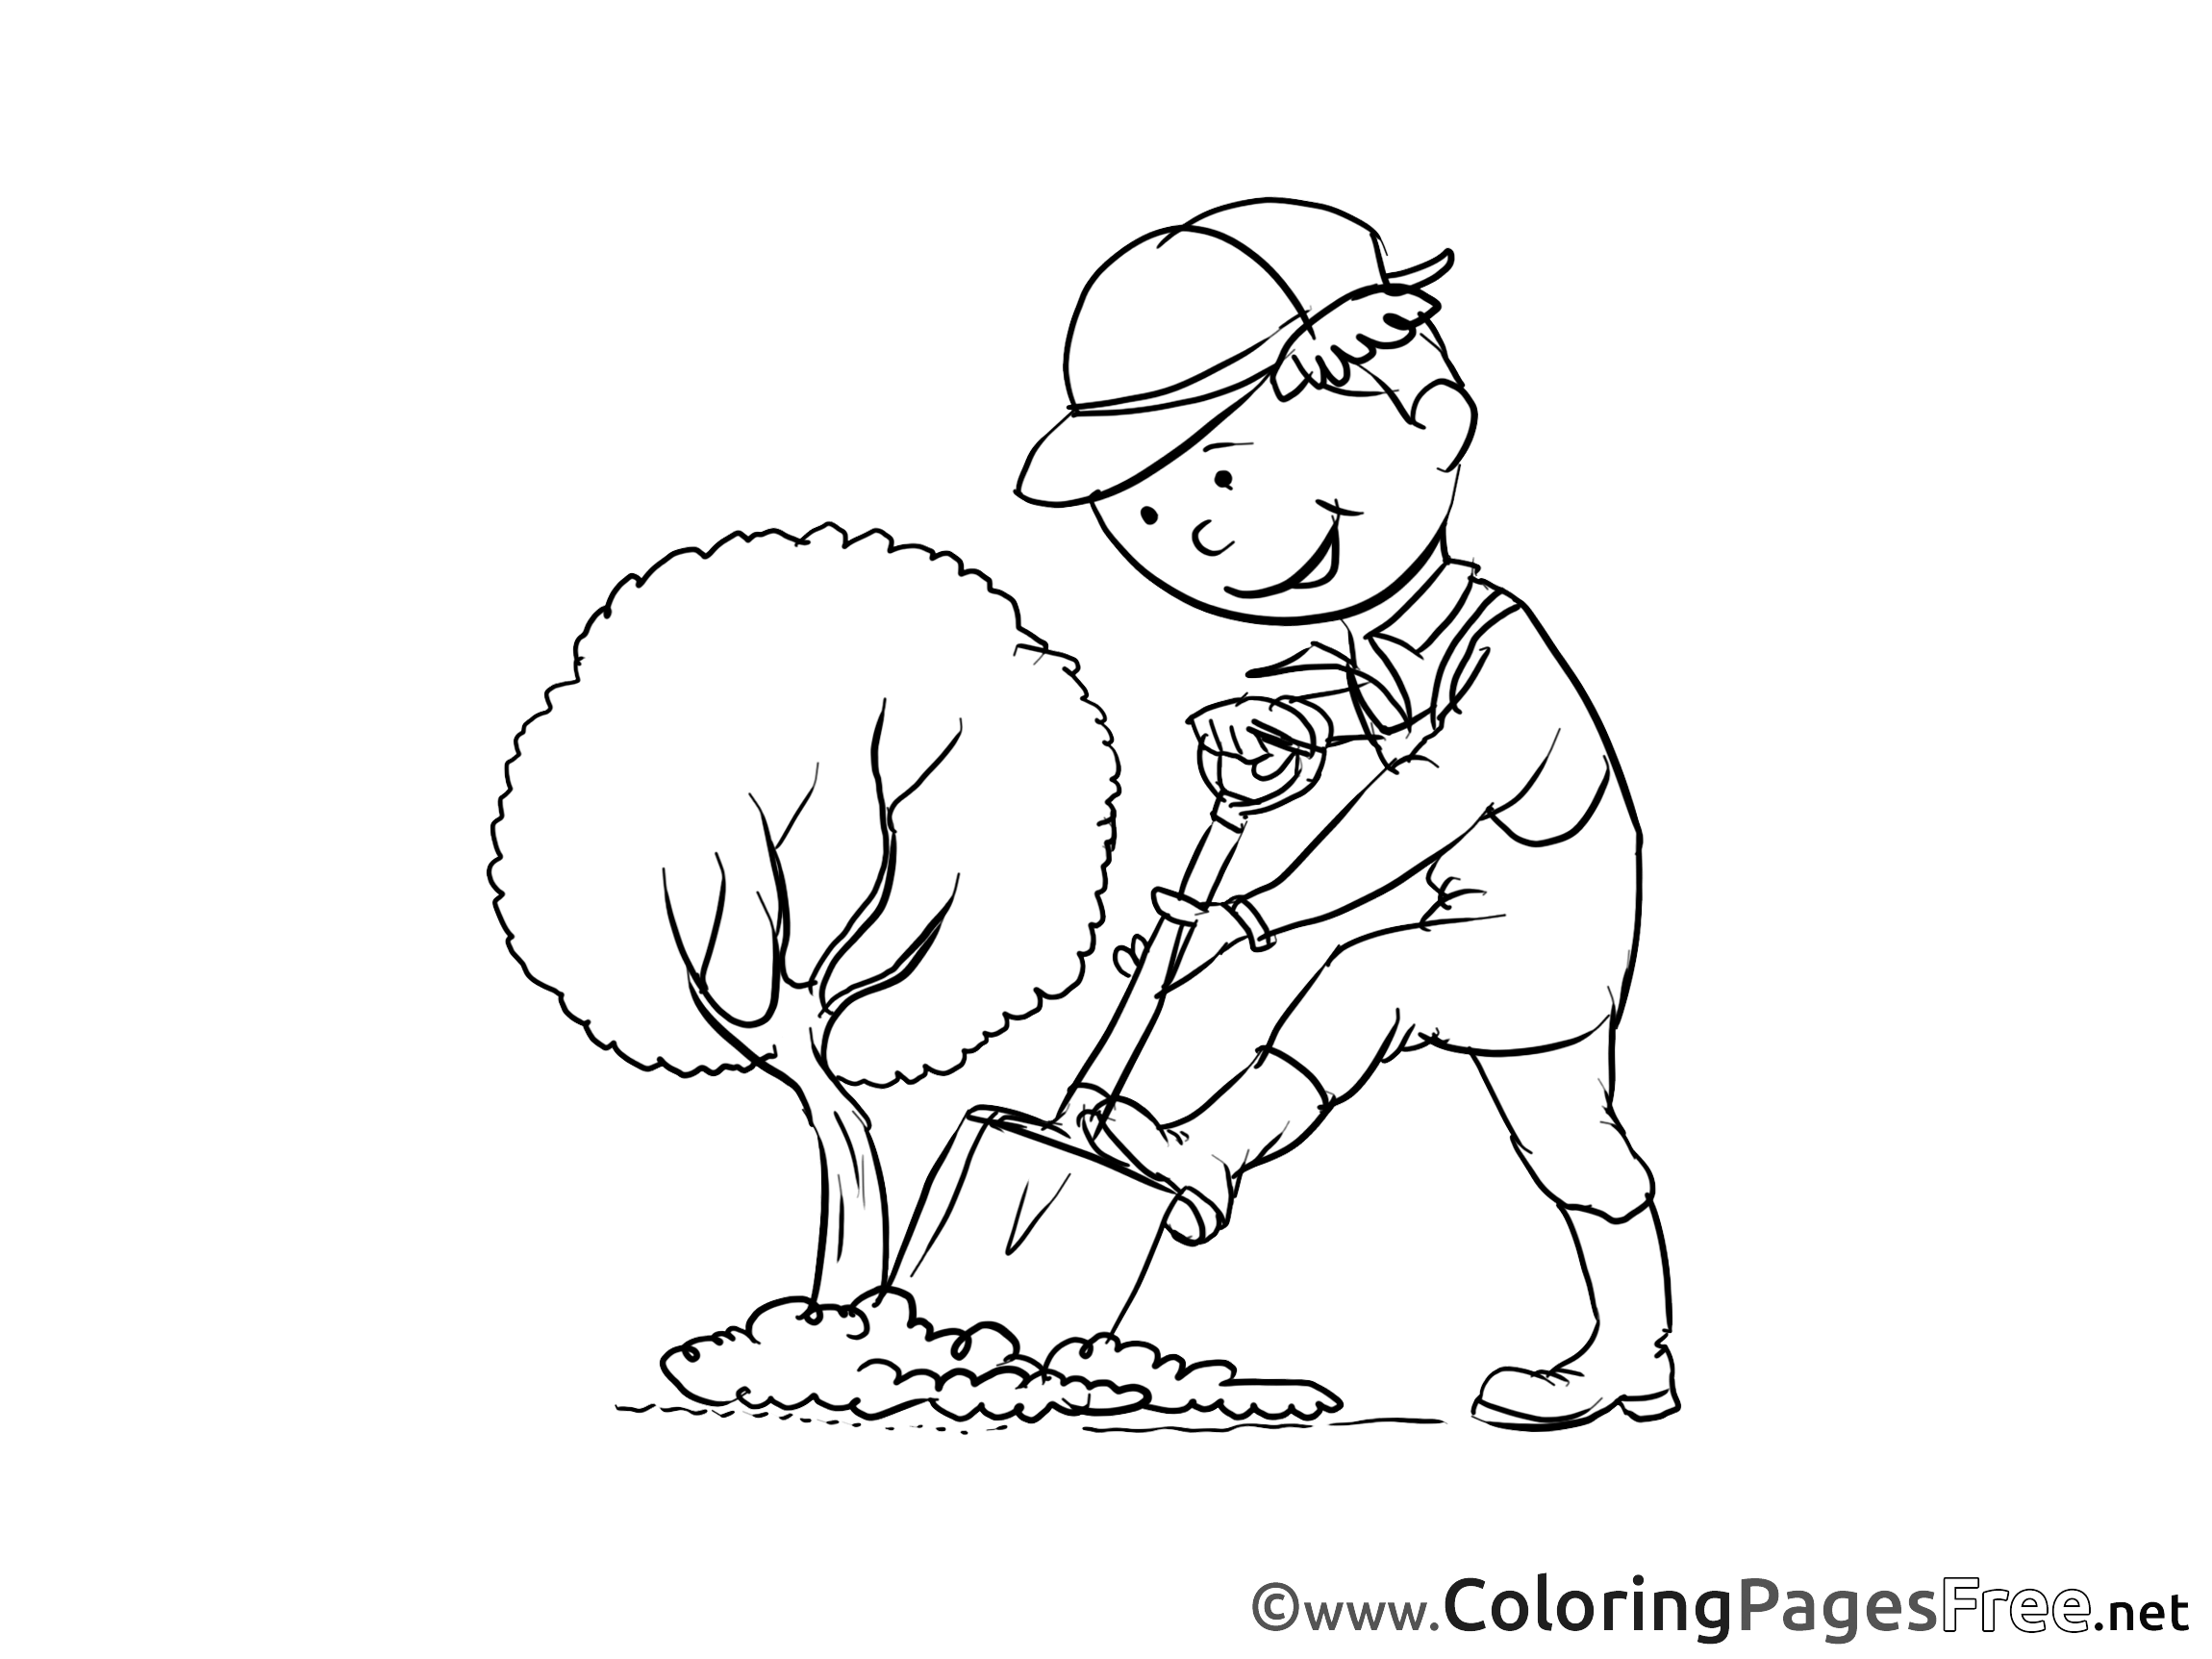 Coloring Page Of Gardener - 252+ Amazing SVG File